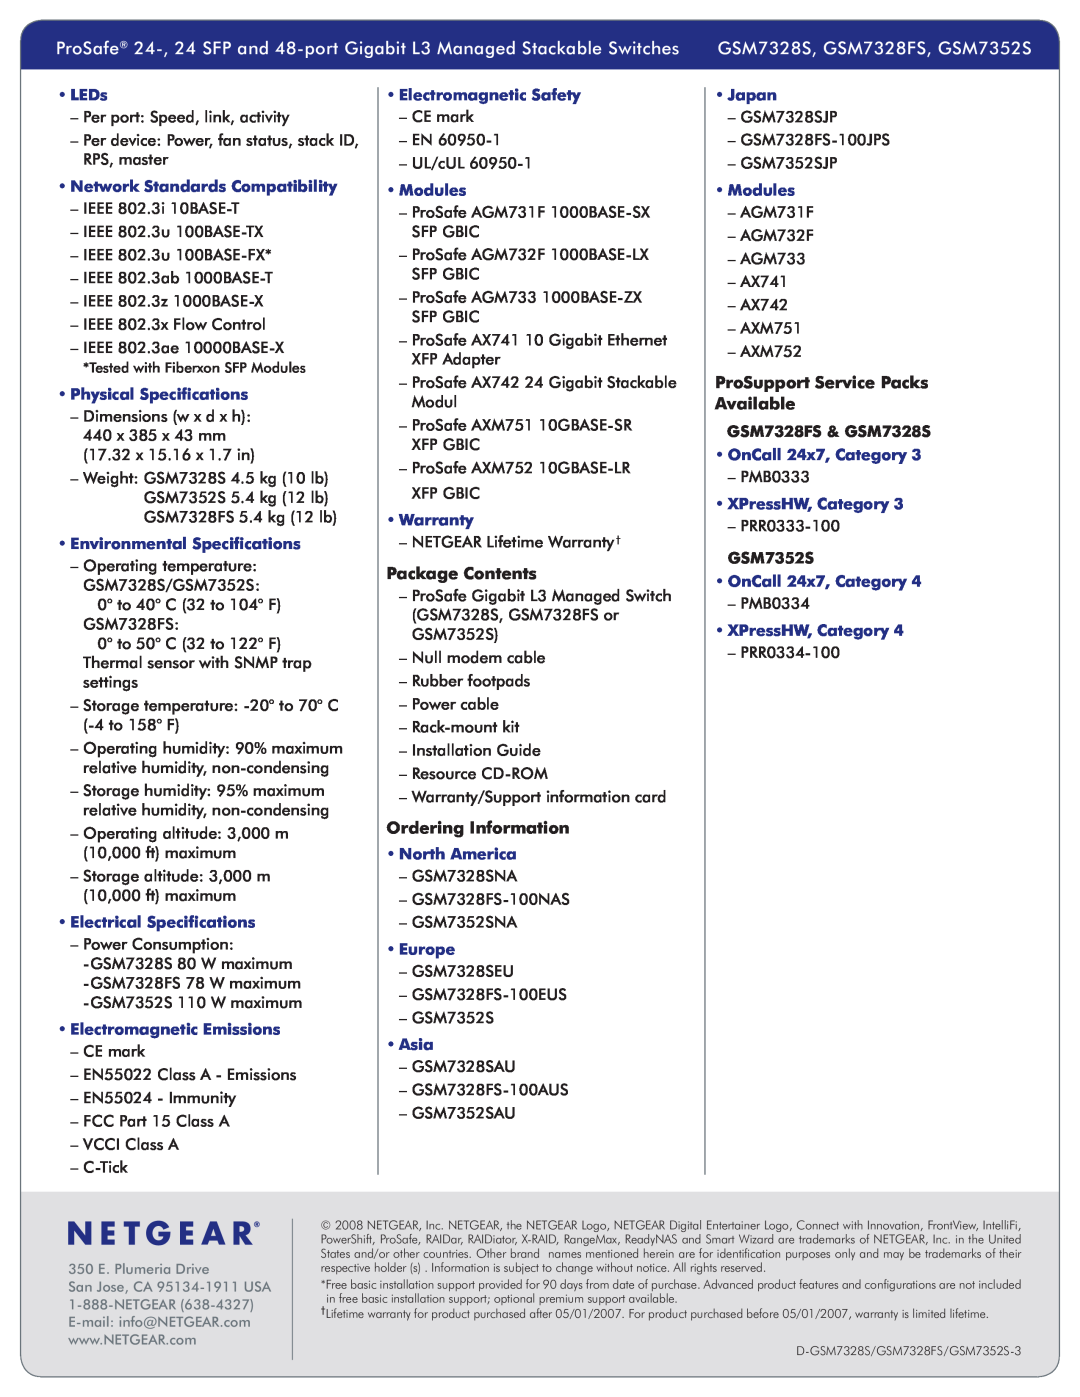 NETGEAR manual Package Contents, Ordering Information, ProSupport Service Packs Available, GSM7328S, GSM7328FS, GSM7352S 